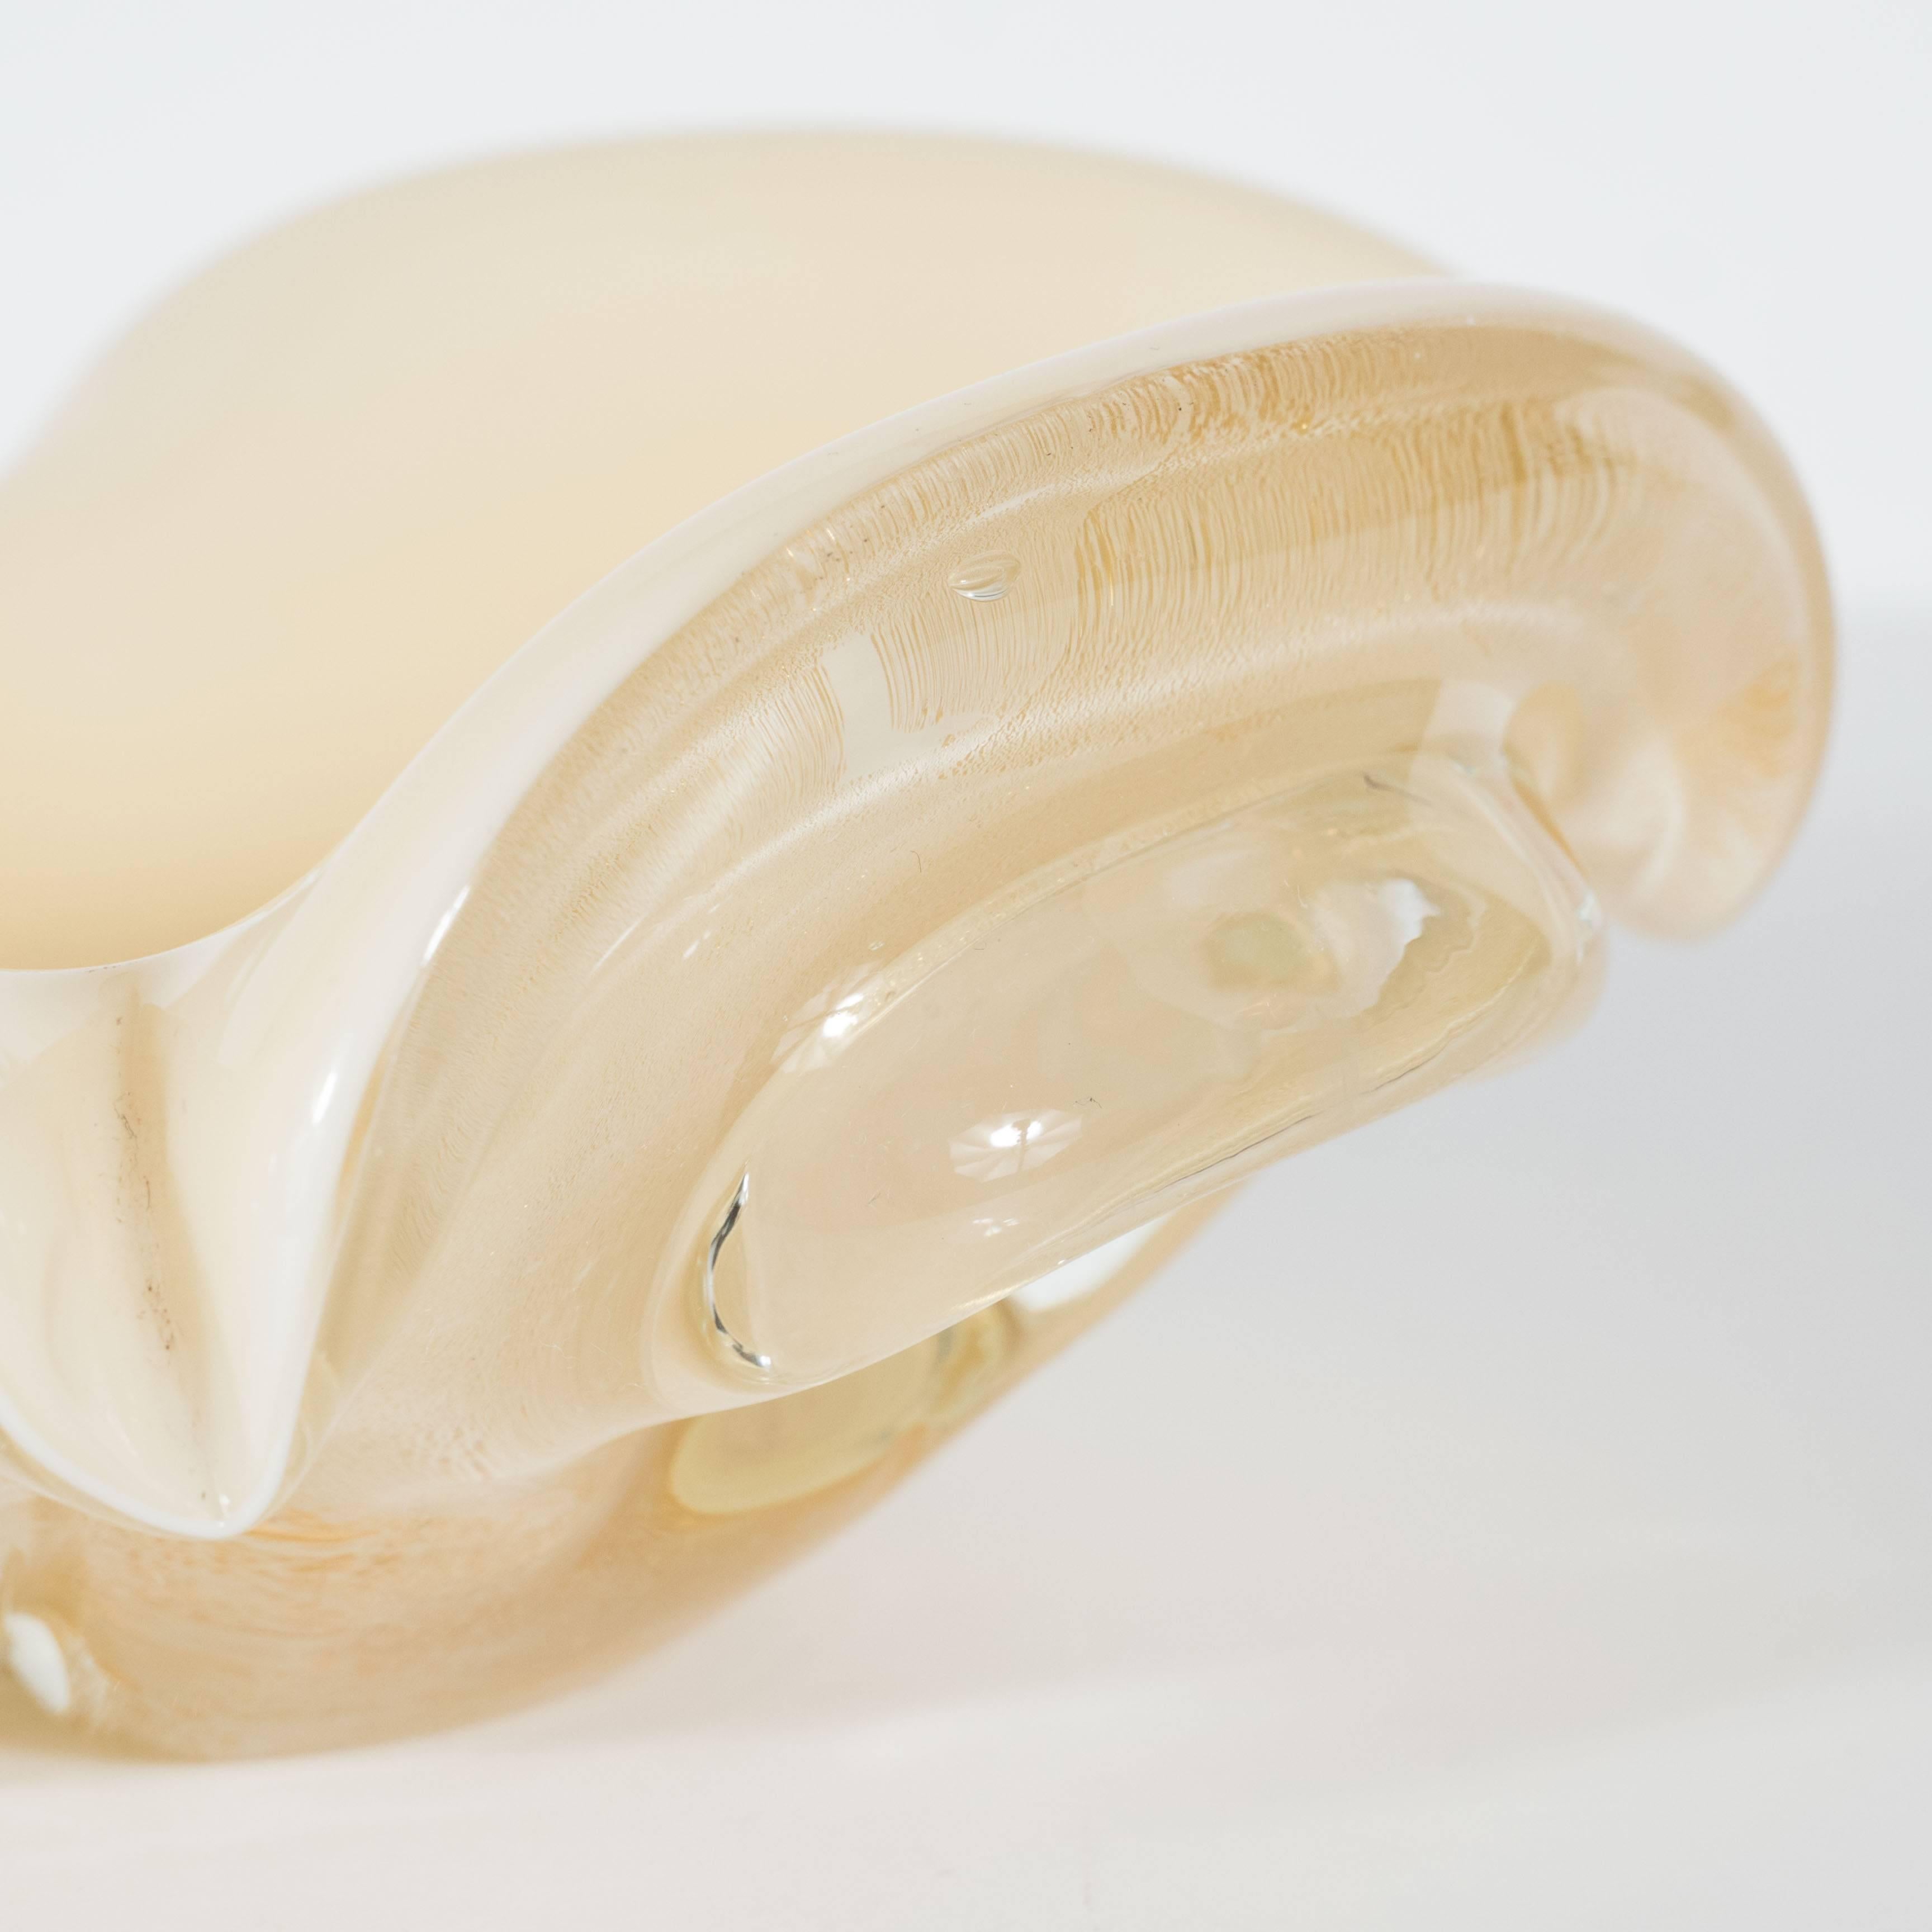 A Mid-Century modernist handblown Murano ashtray or bowl in opaque creme and clear champagne glass with imbedded 24-carat gold flecks. Wide scalloped detailing across the four sides creates four cigarette supports. Although probably designed as an